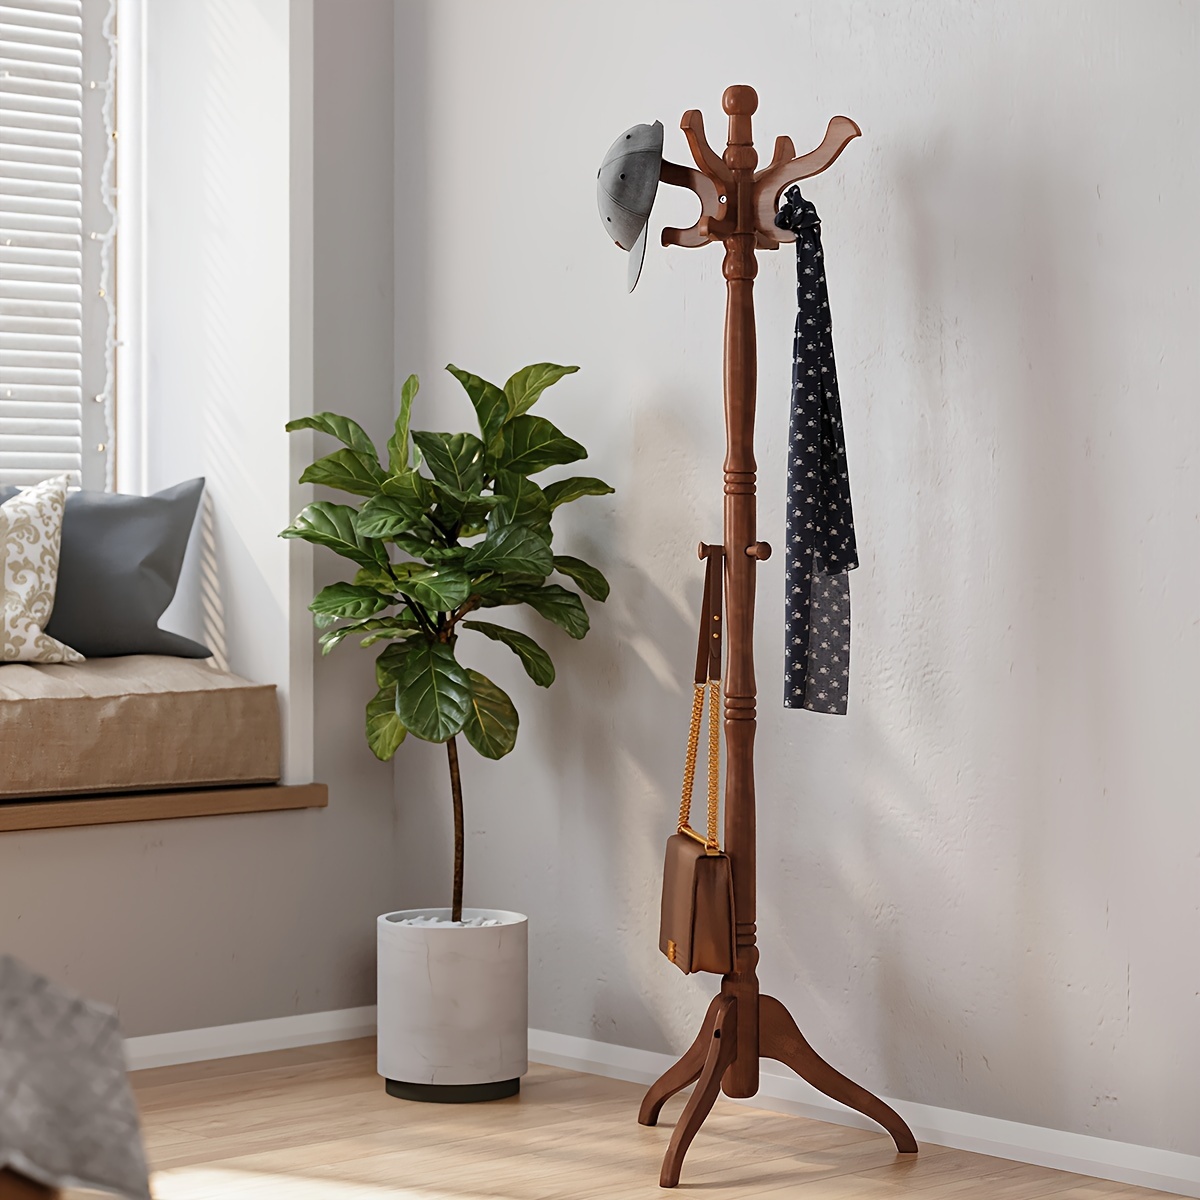 

Vasagle Coat Rack Free Standing With 11 Hooks, Wooden Hall Tree Coat Hat Tree Coat Holder With Solid Rubberwood Base For Coat, Hat, Clothes, Scarves, Handbags, Umbrella